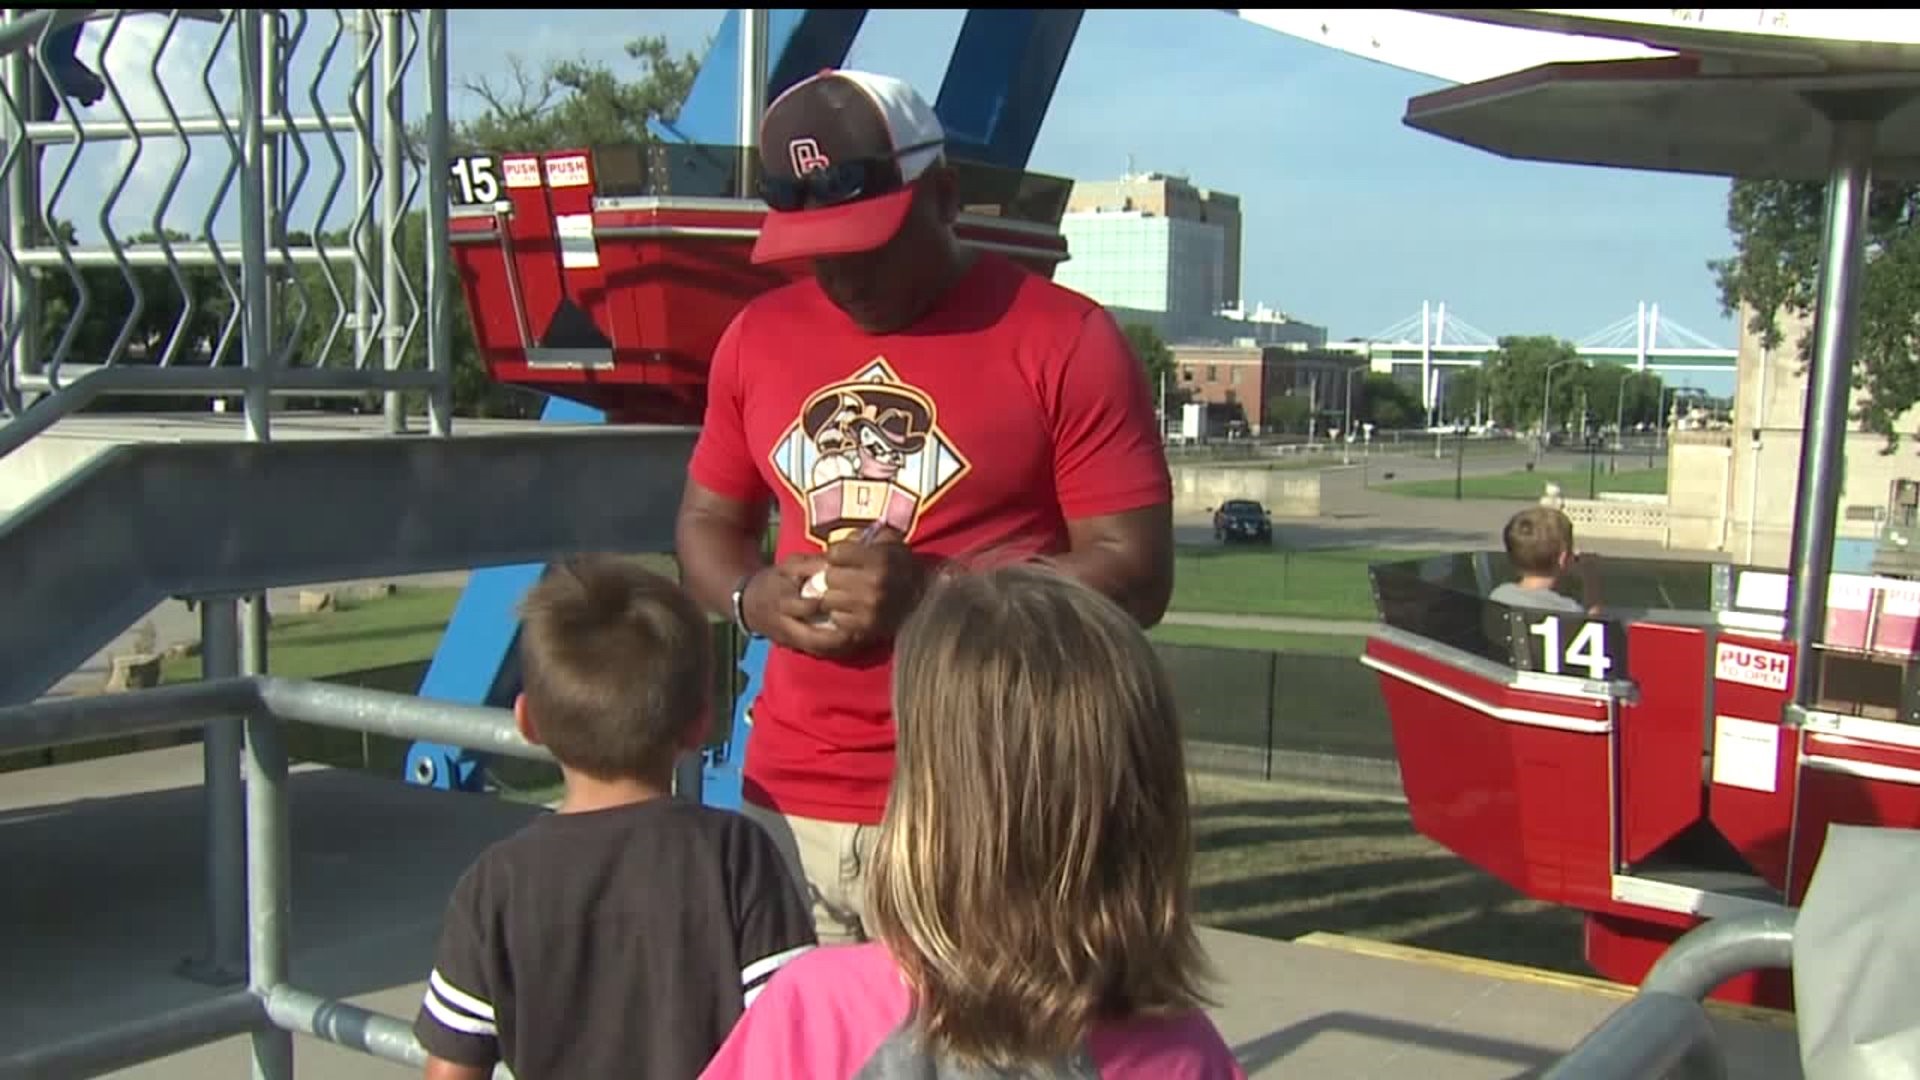 Kids get River Bandits employees to sign foul ball